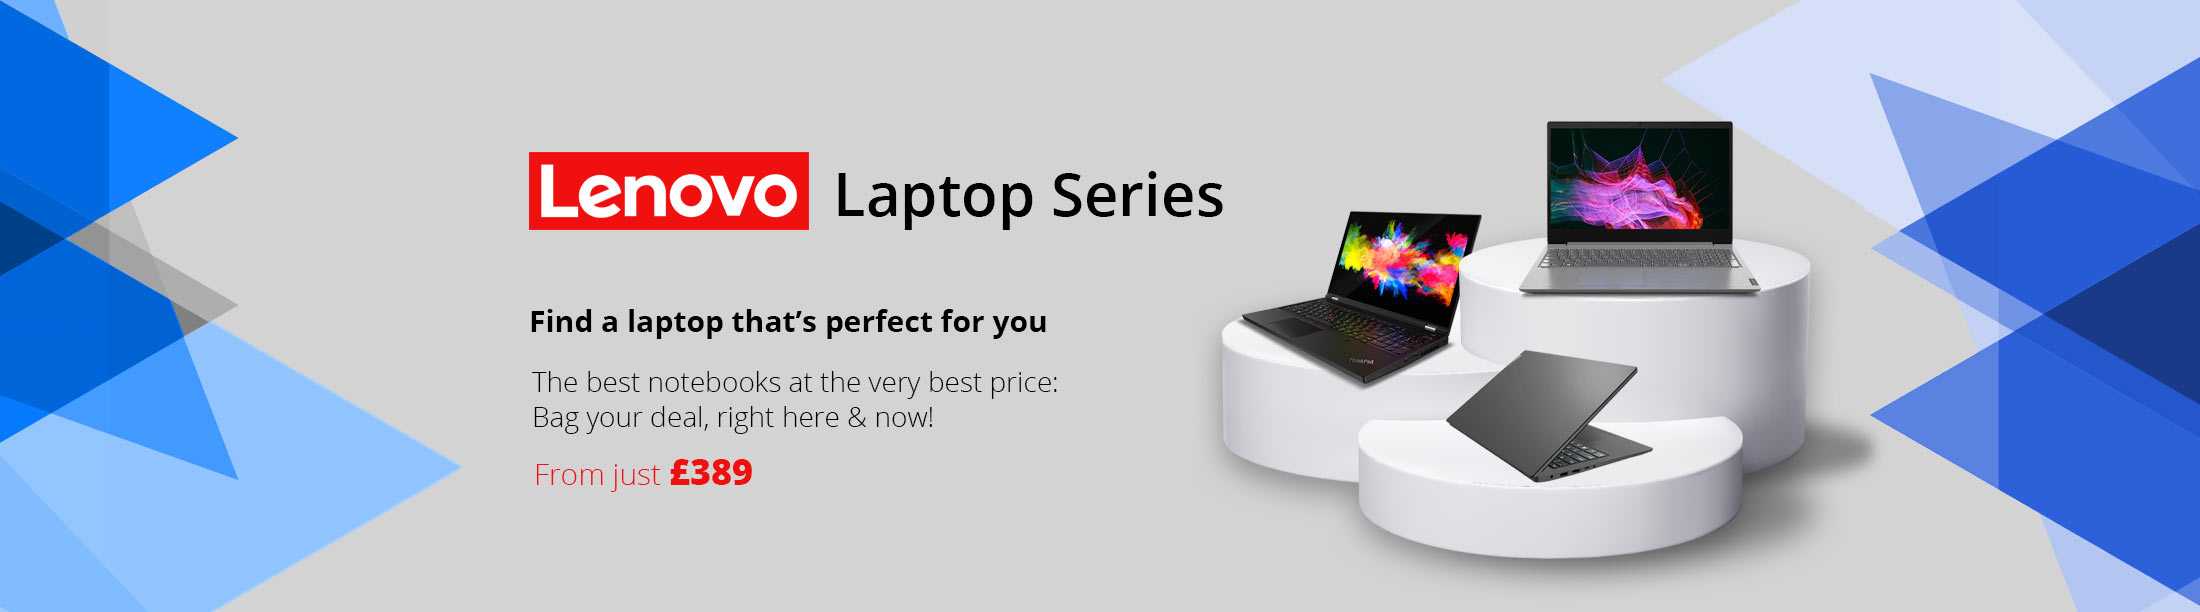 Lenovo Laptop Series - The best notebooks at the very best price: Bag your deal, right here & now!